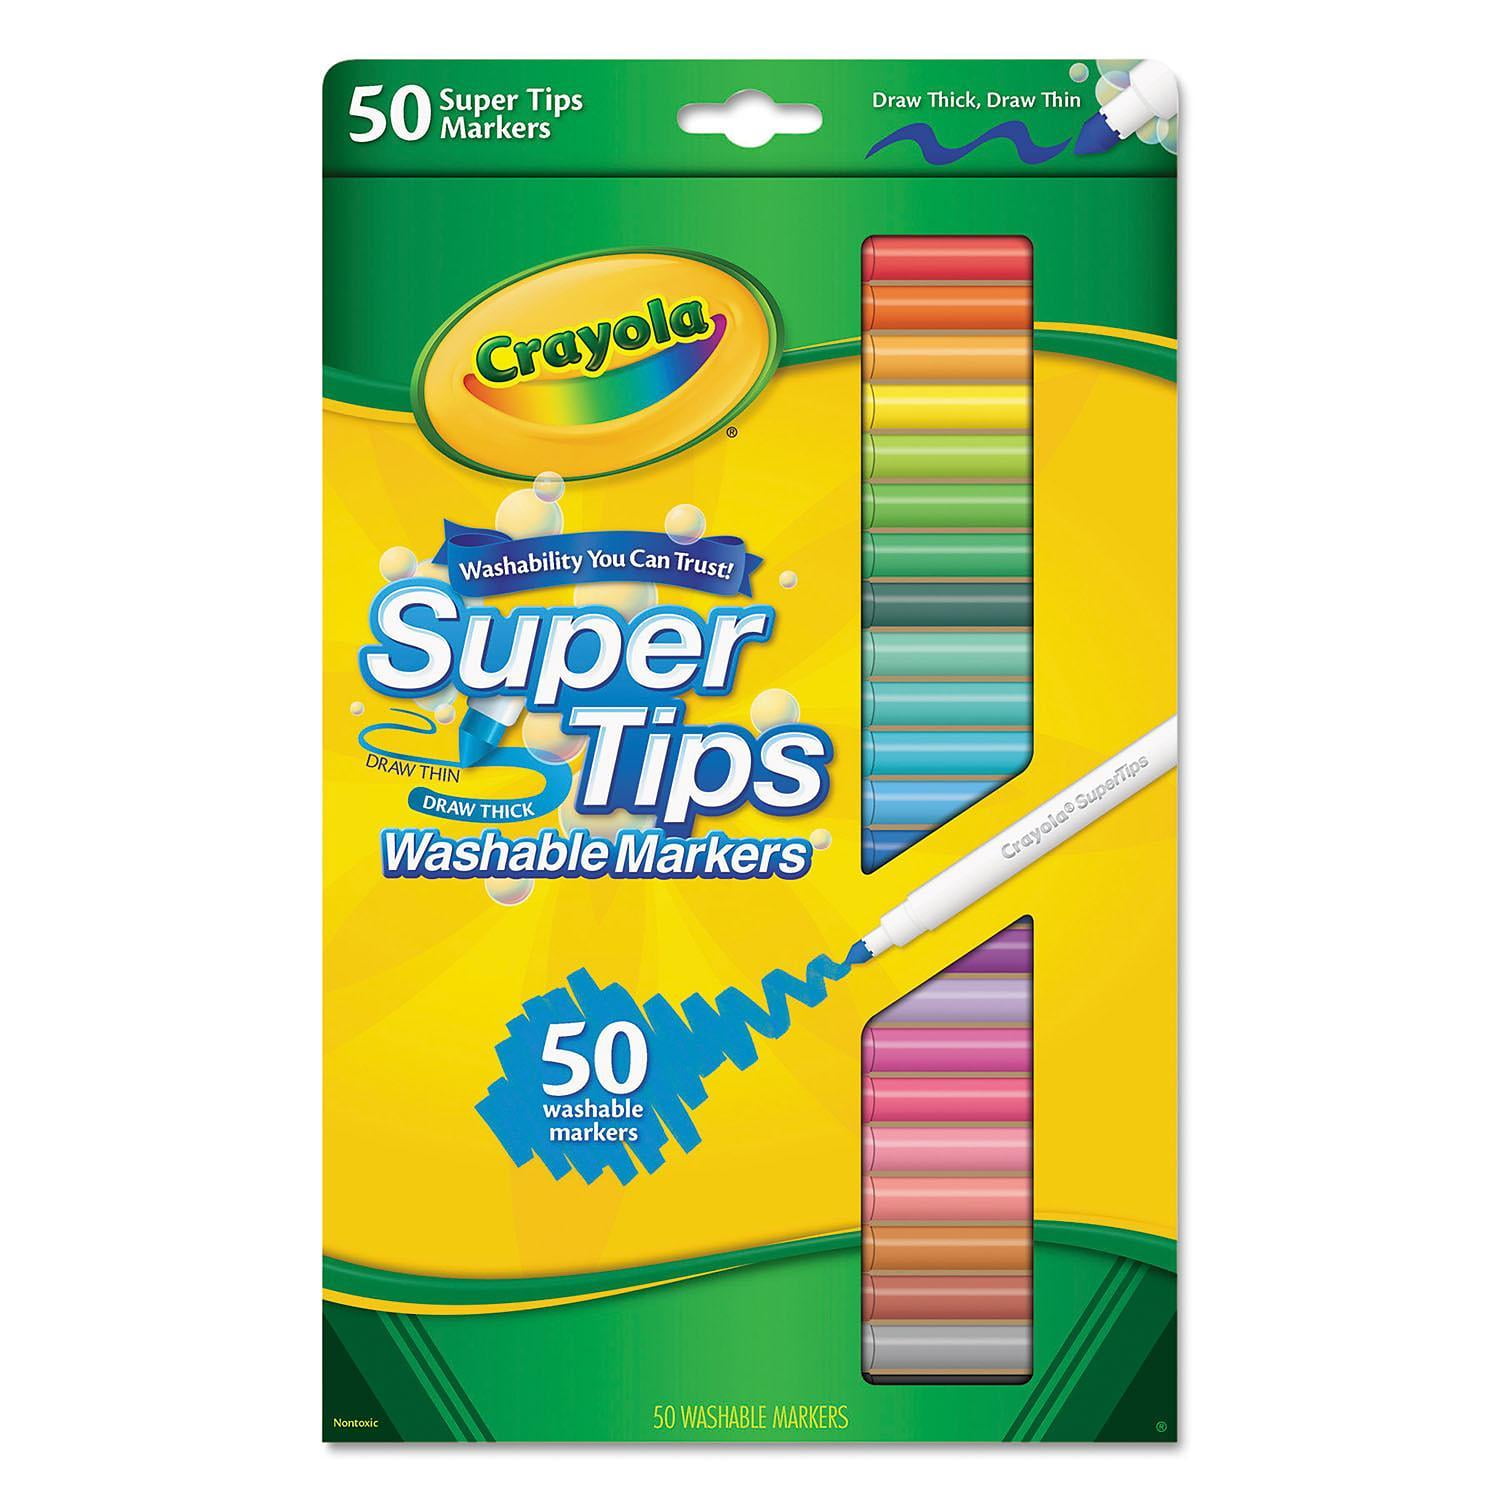 Crayola Super Tips 100 Pack, Quick Review, Color Swatch